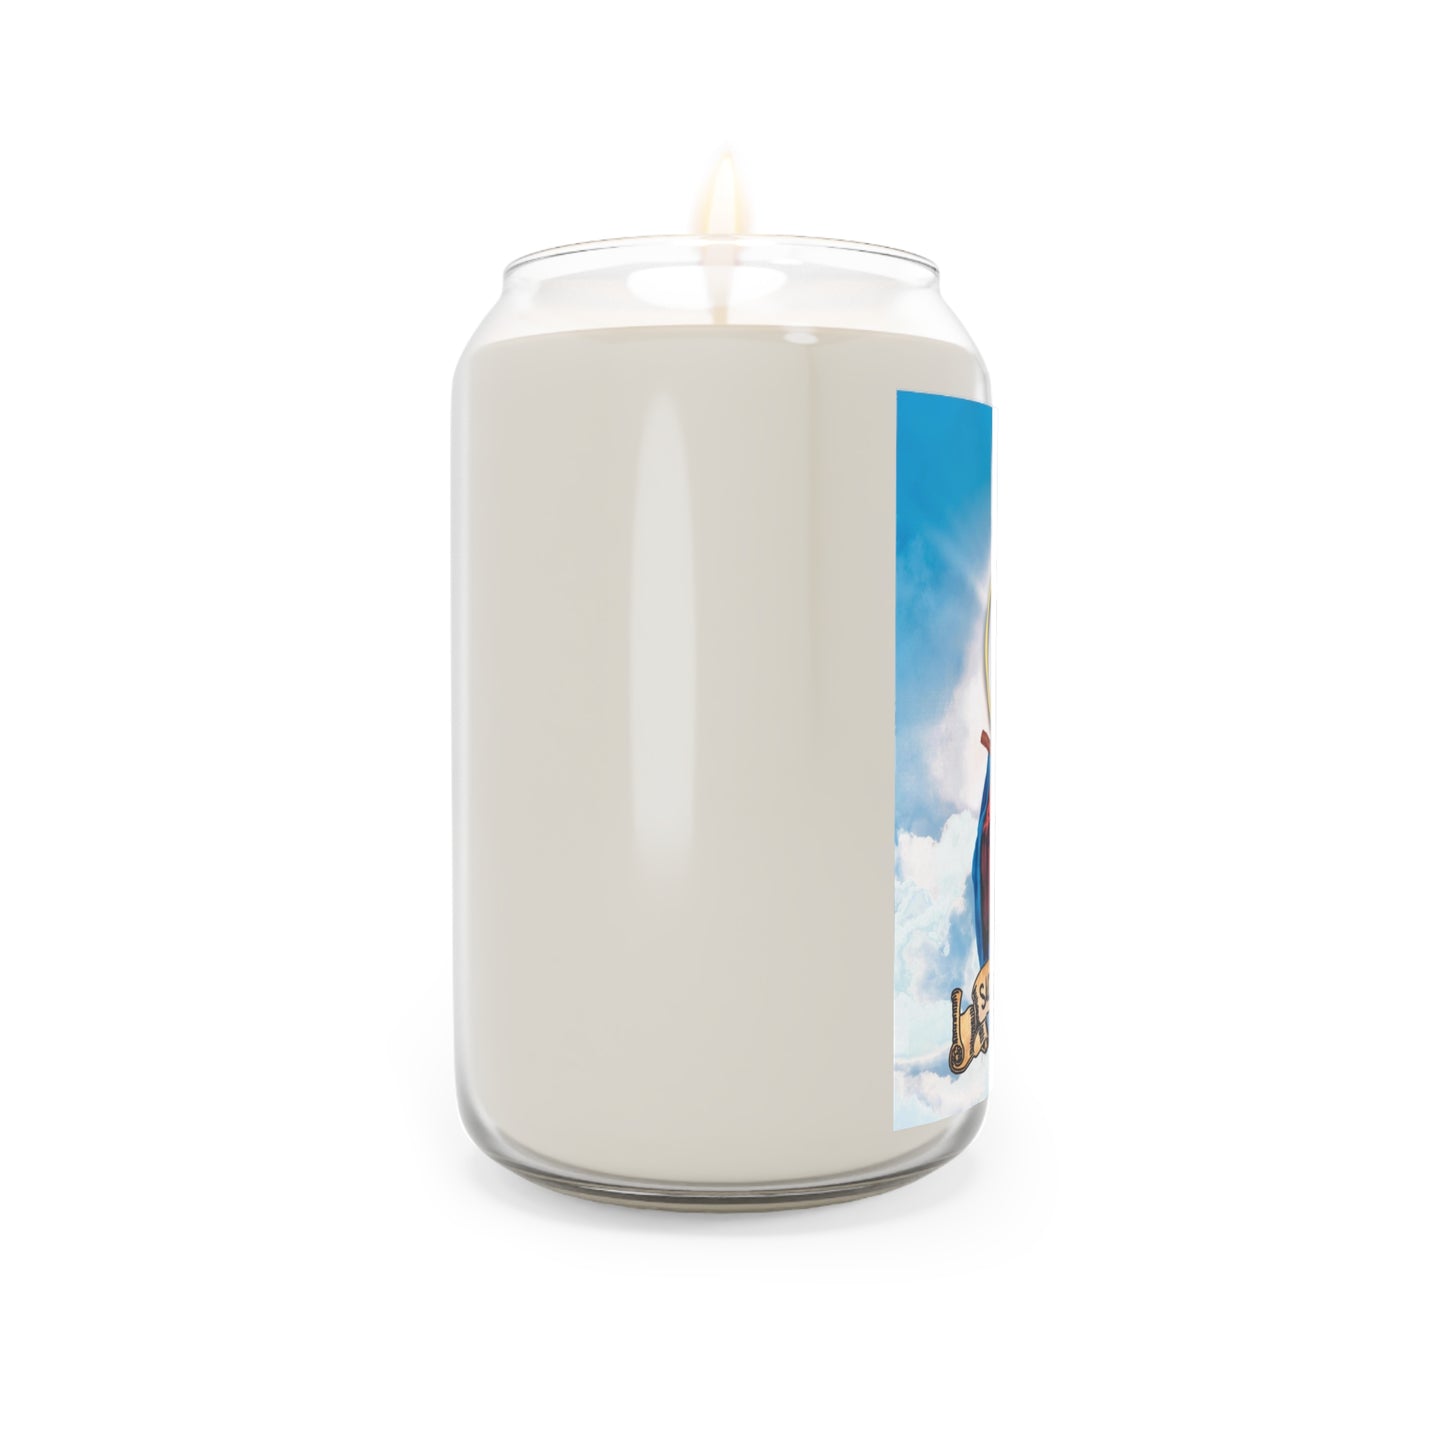 Sacred Heart of DeVito Candle